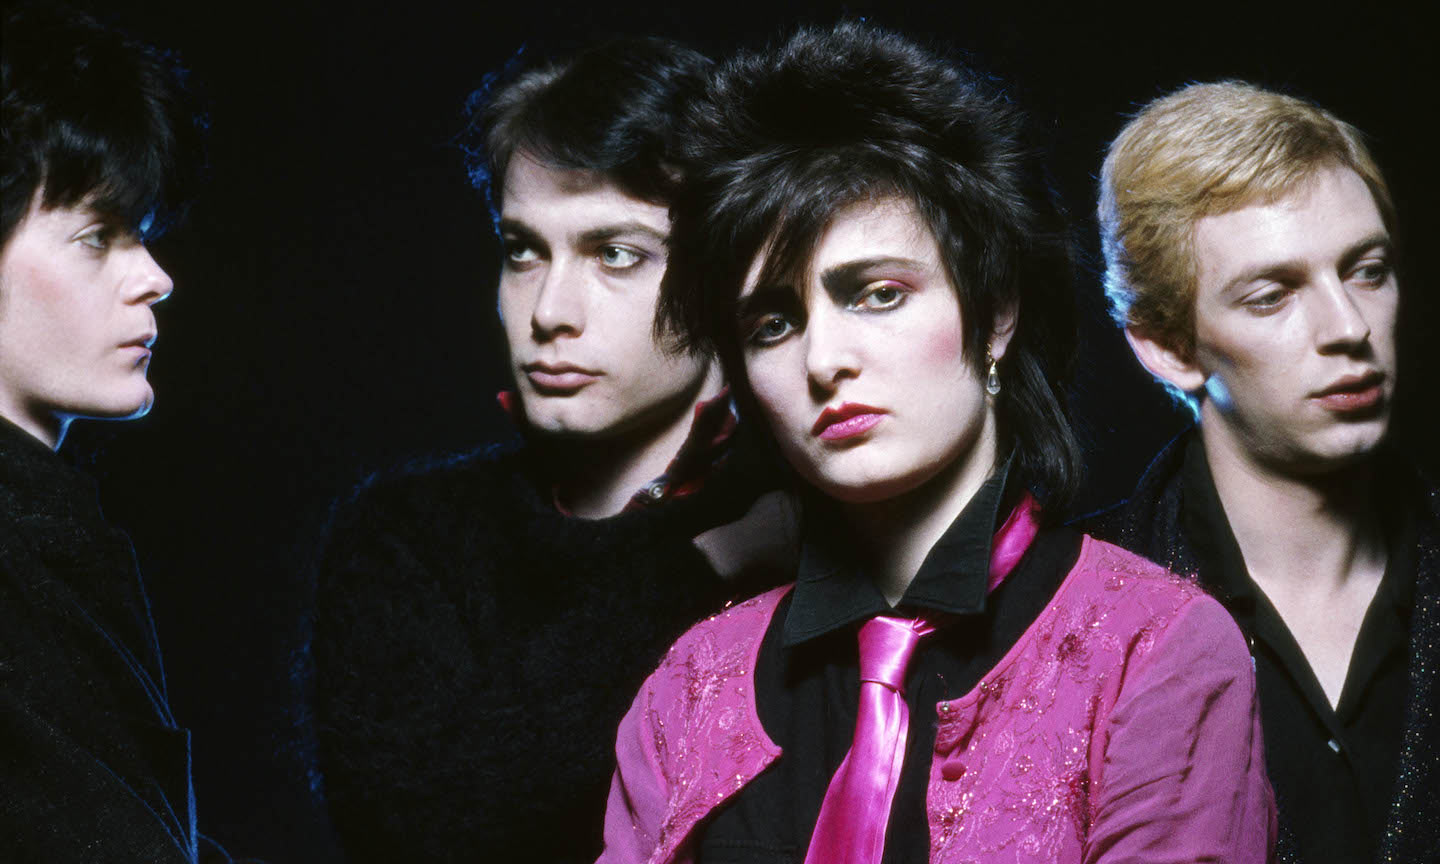 Night Shift Lyrics by Siouxsie and the Banshees